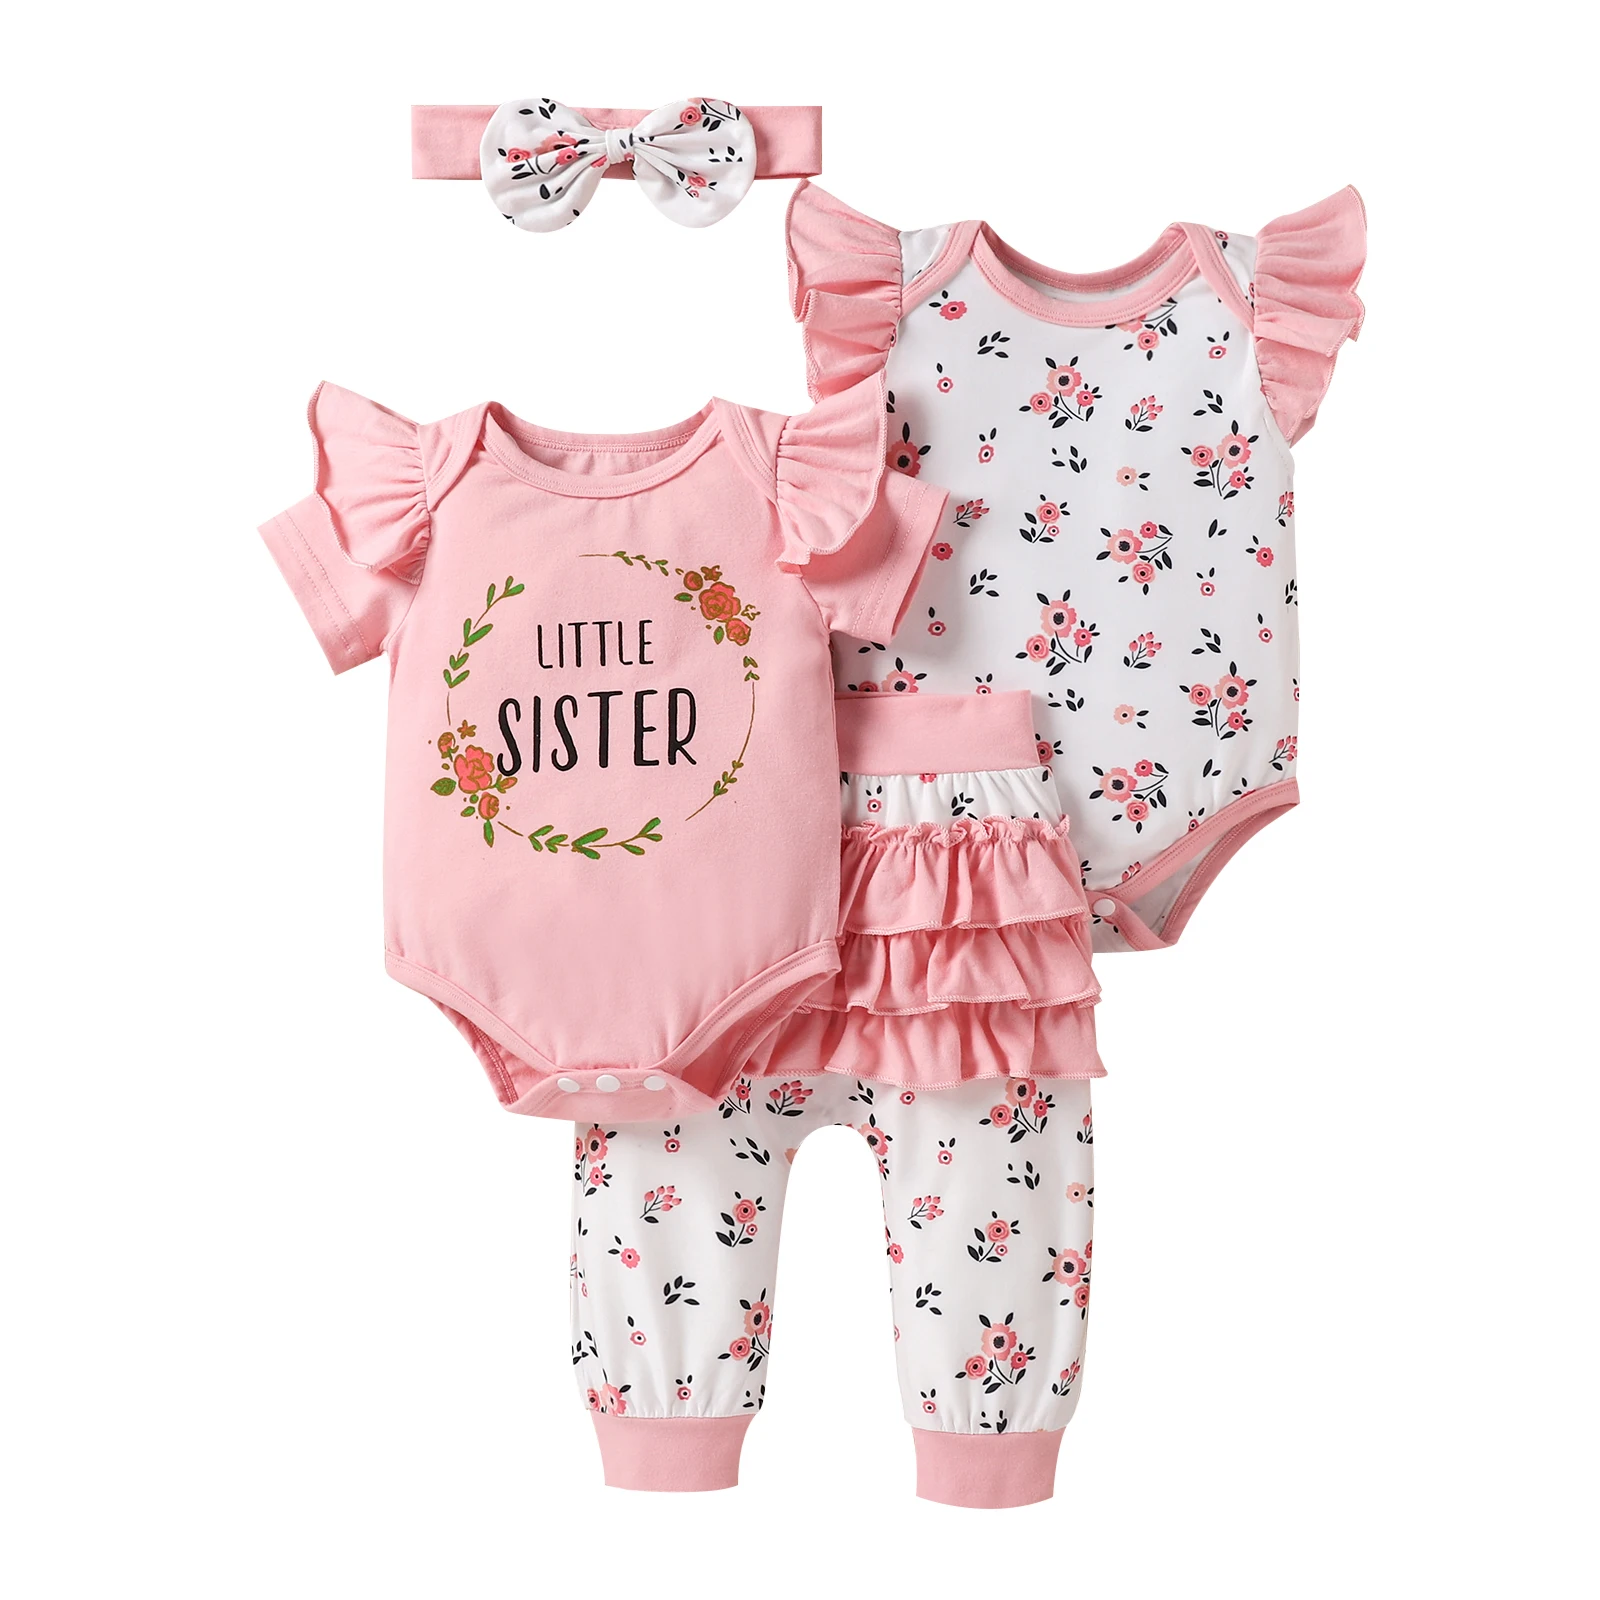 

Ma&Baby 0-24M Summer Newborn Infant Baby Girl Clothes Set Flower Letter Romper Ruffle Pants Headband Outfits DD43